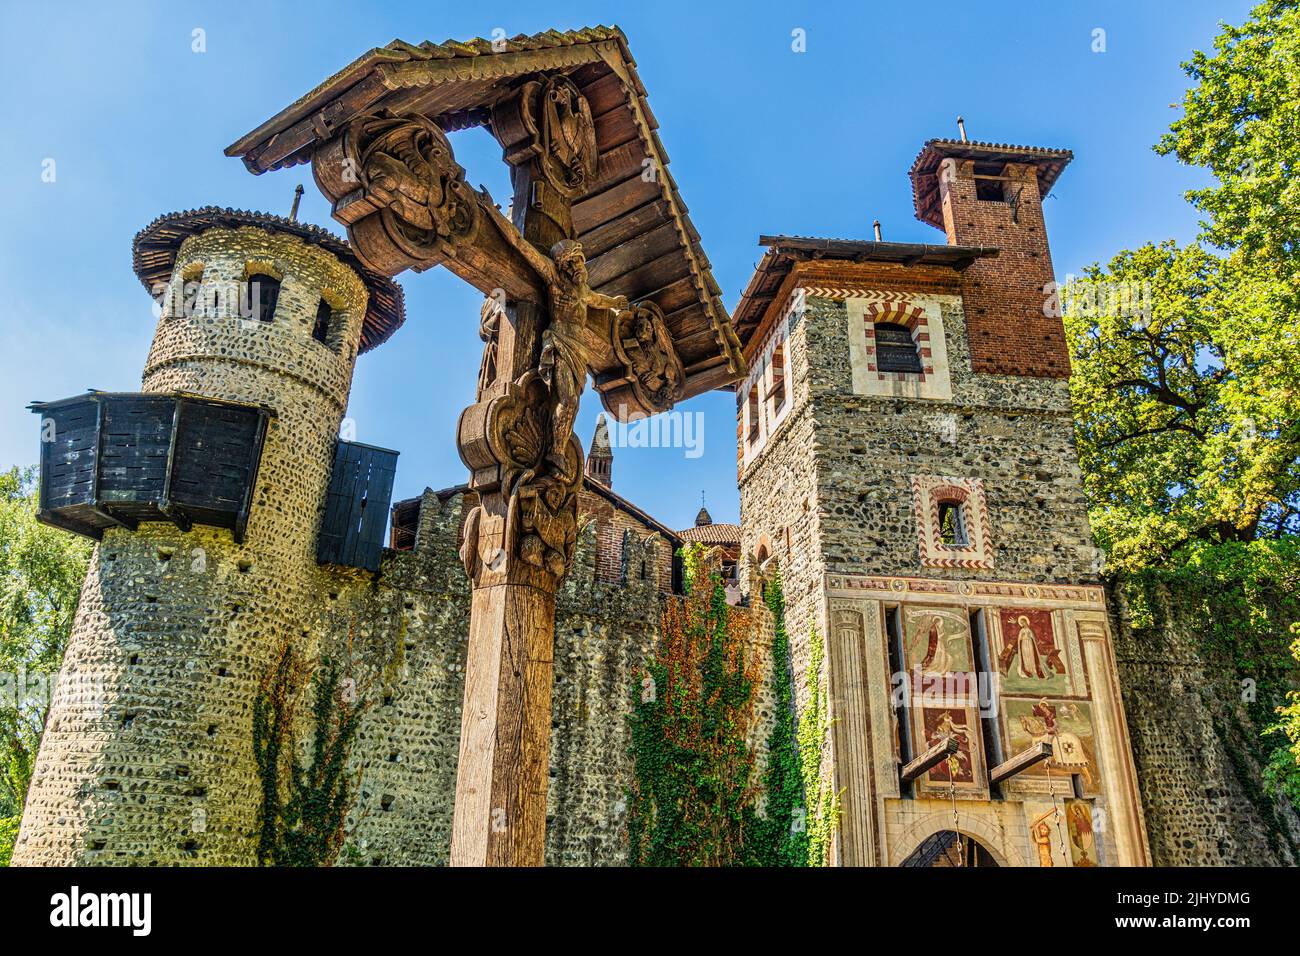 Entrance of the Medieval Village in the Valentino Park, with wooden crucifix. Turin, Turin province, Piedmont, Italy, Europe Stock Photo